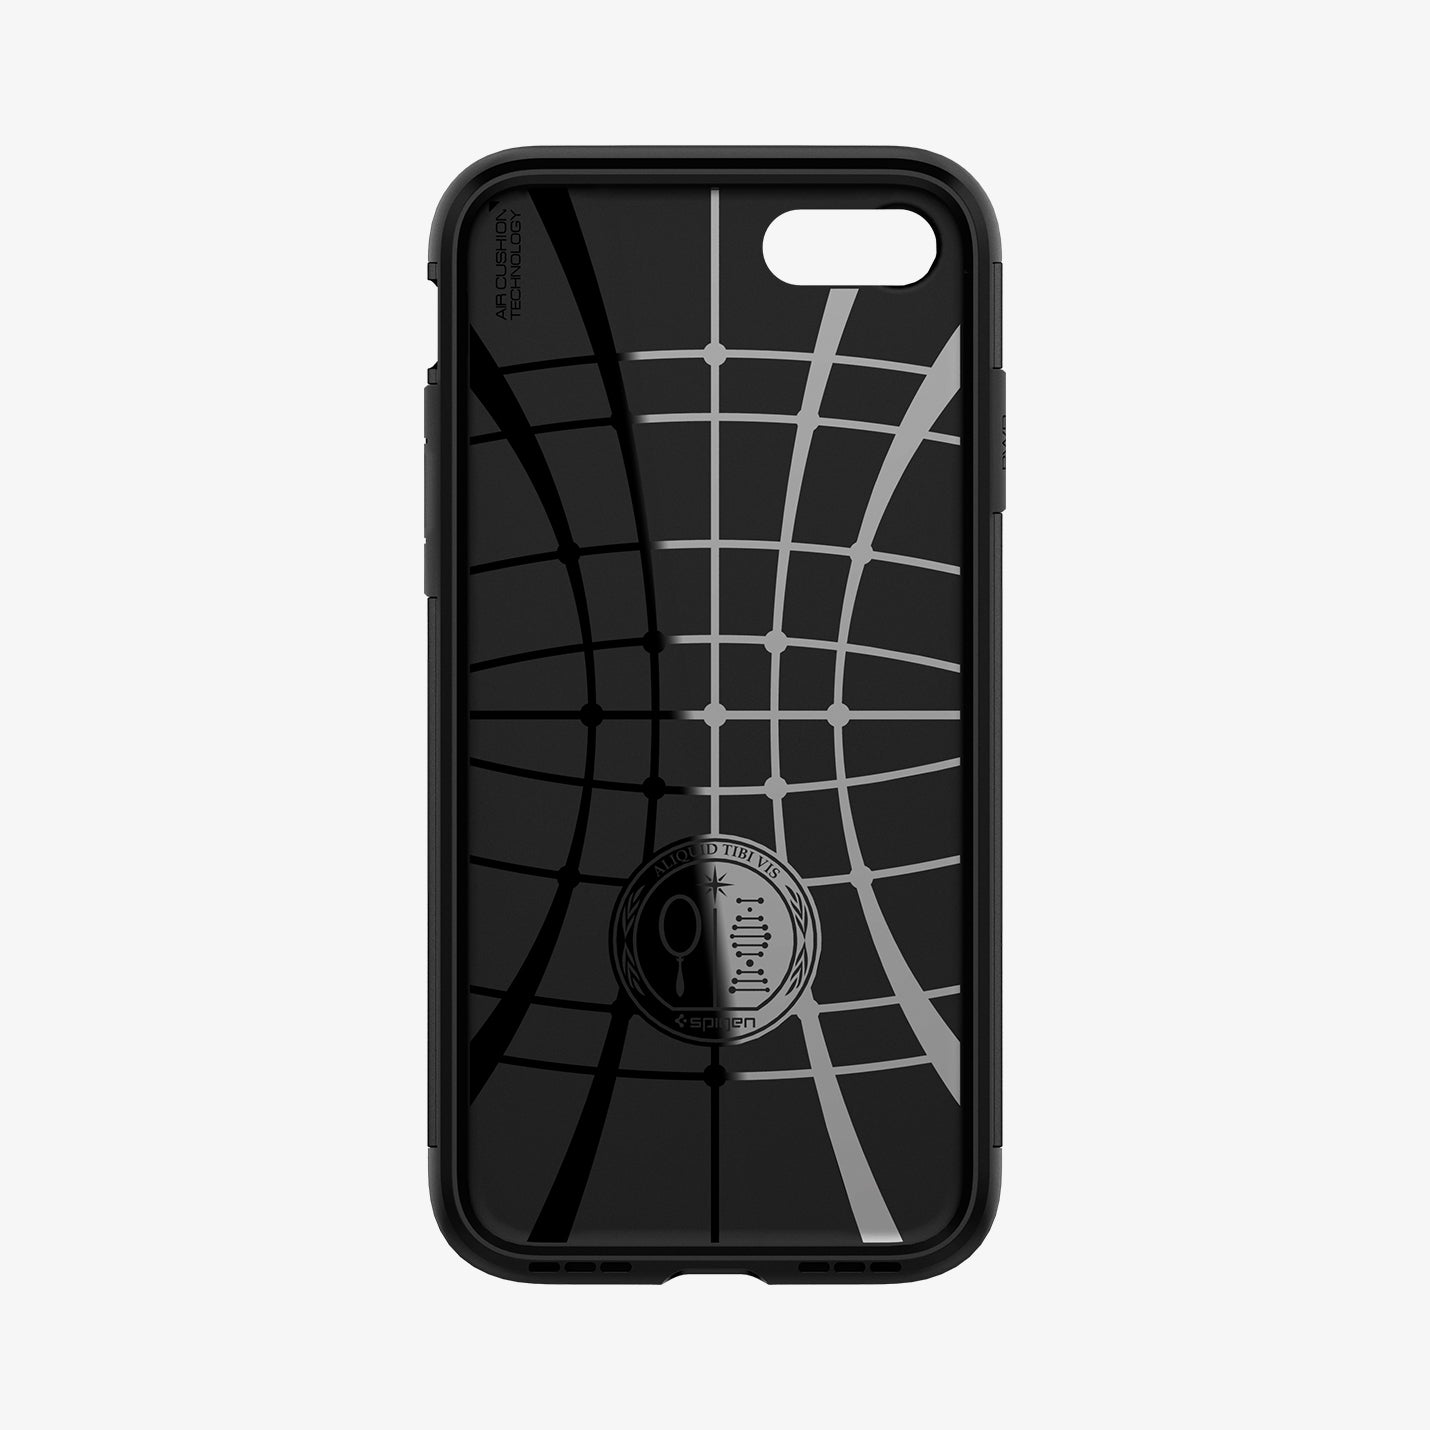 ACS00886 - iPhone 7 Series Slim Armor Case in Black showing the inside